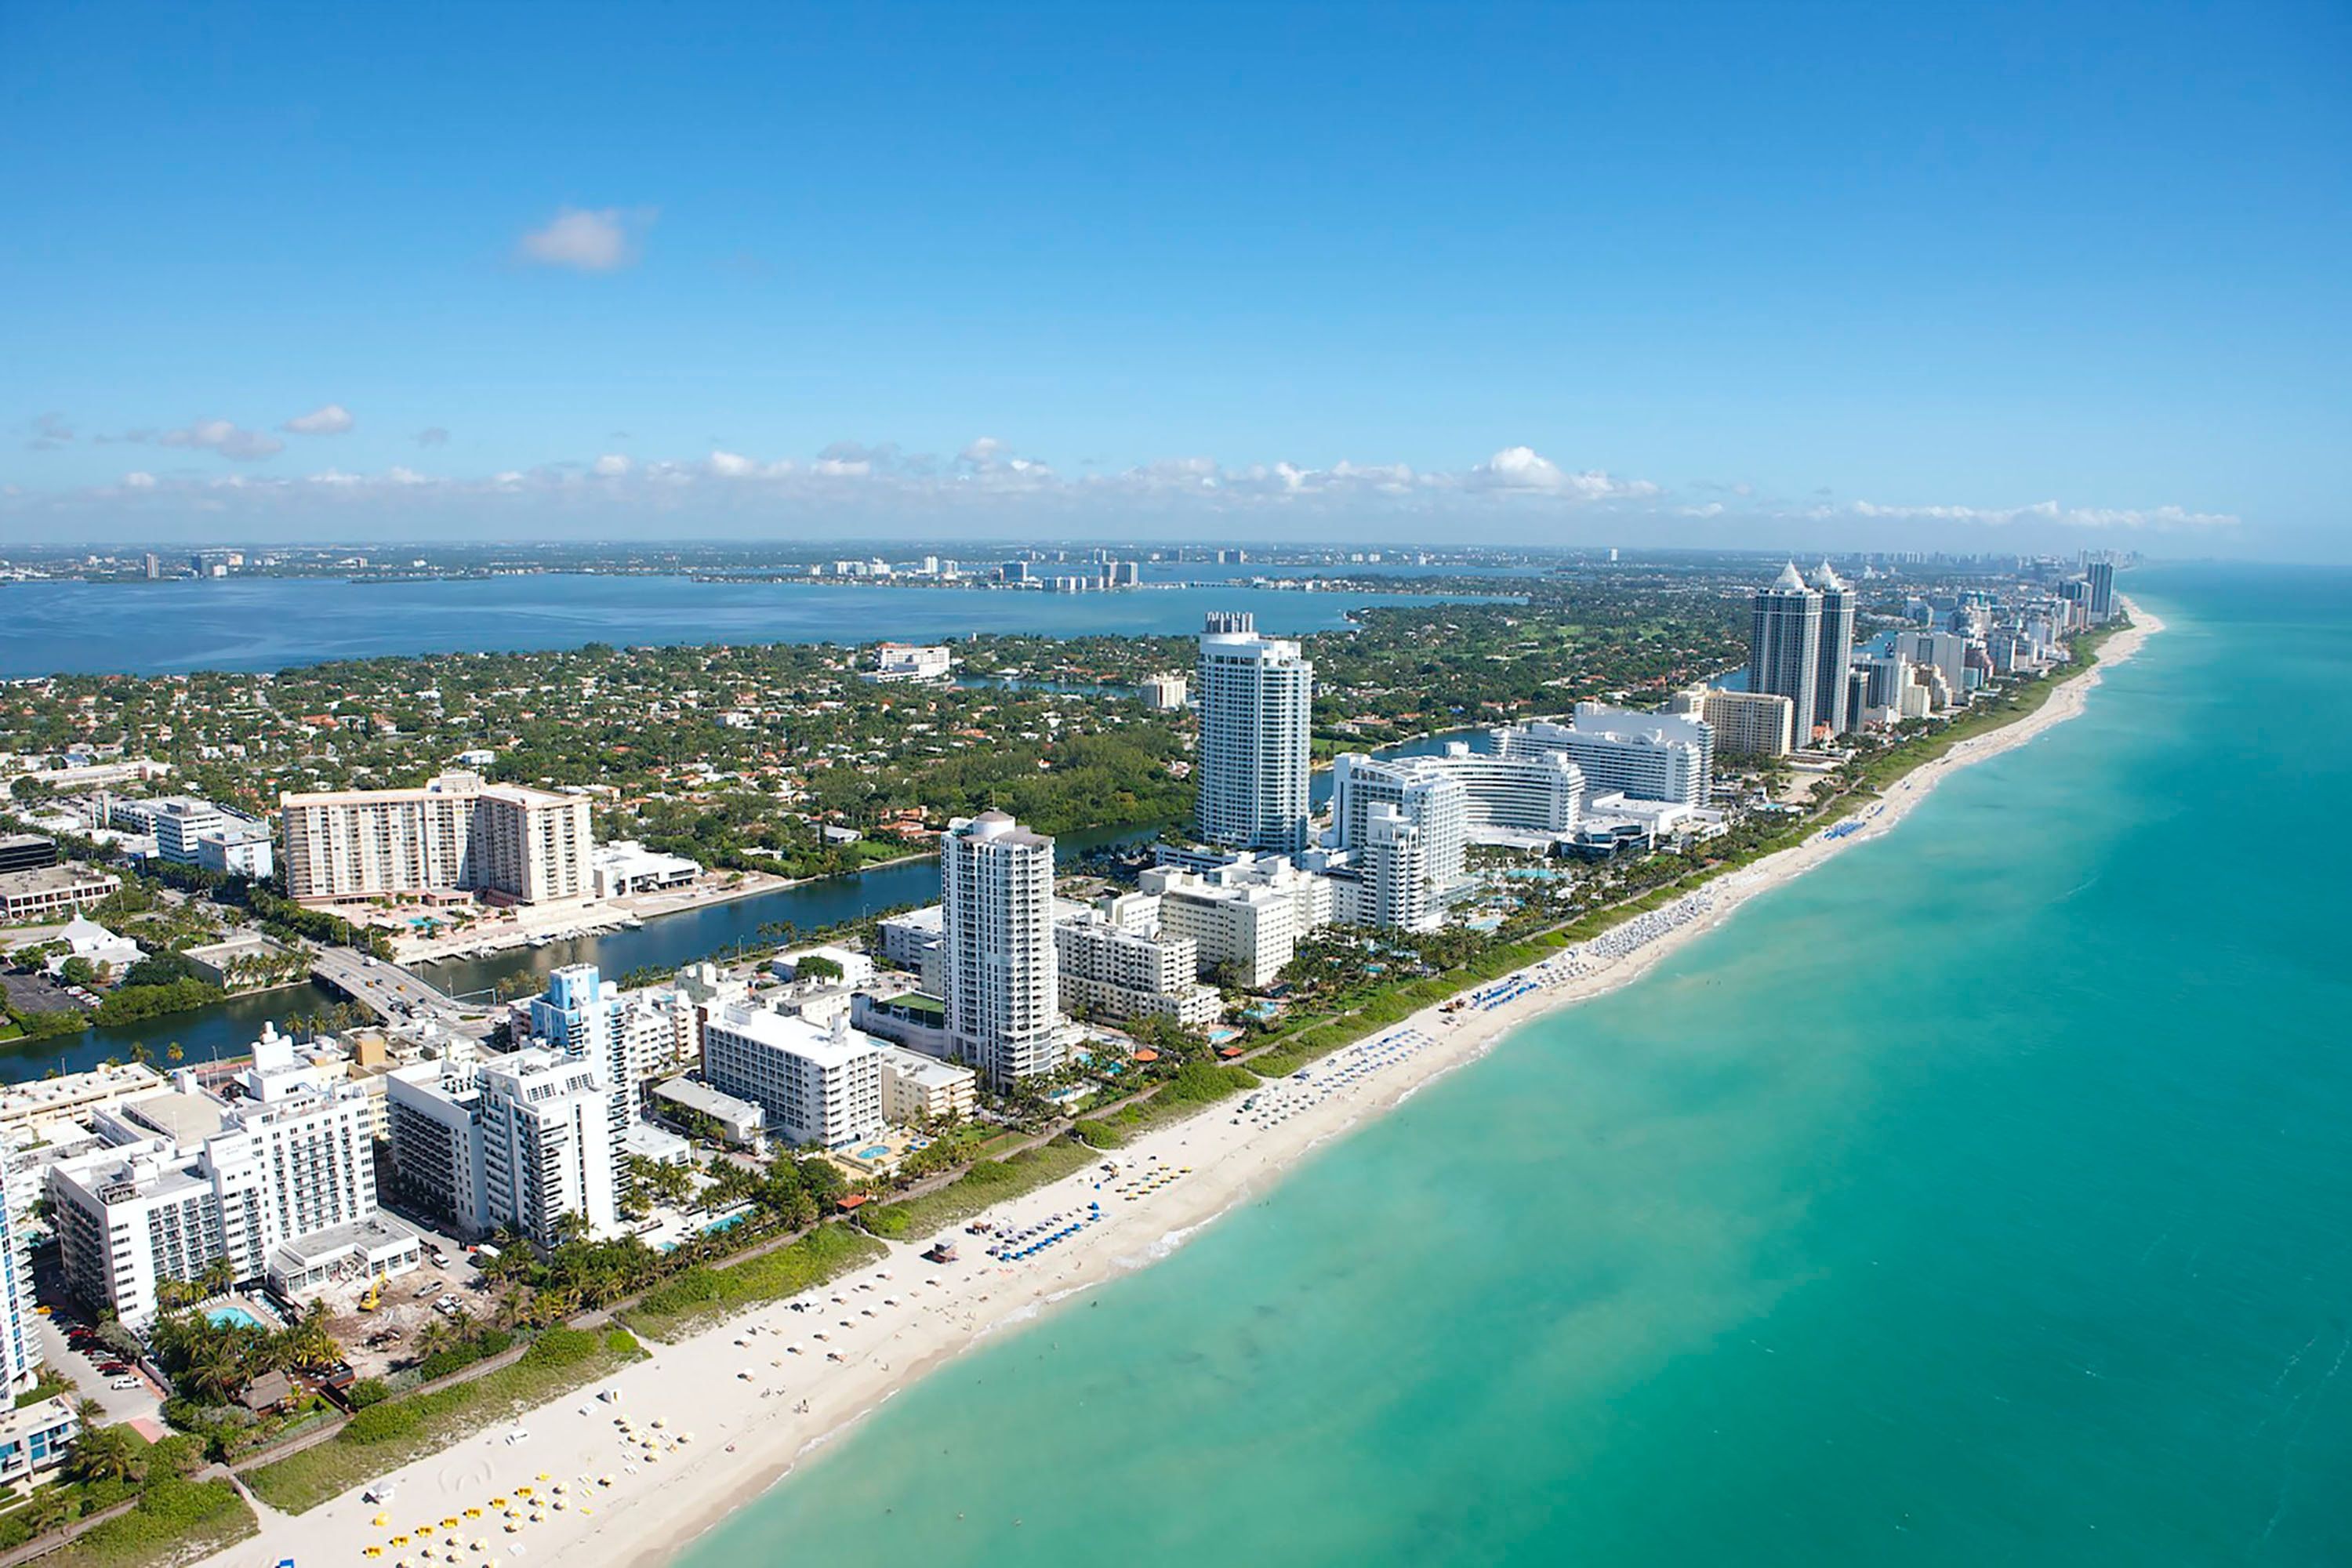 Blue water and white sand beach with high-rise buildings on Miami Beach, Florida, USA